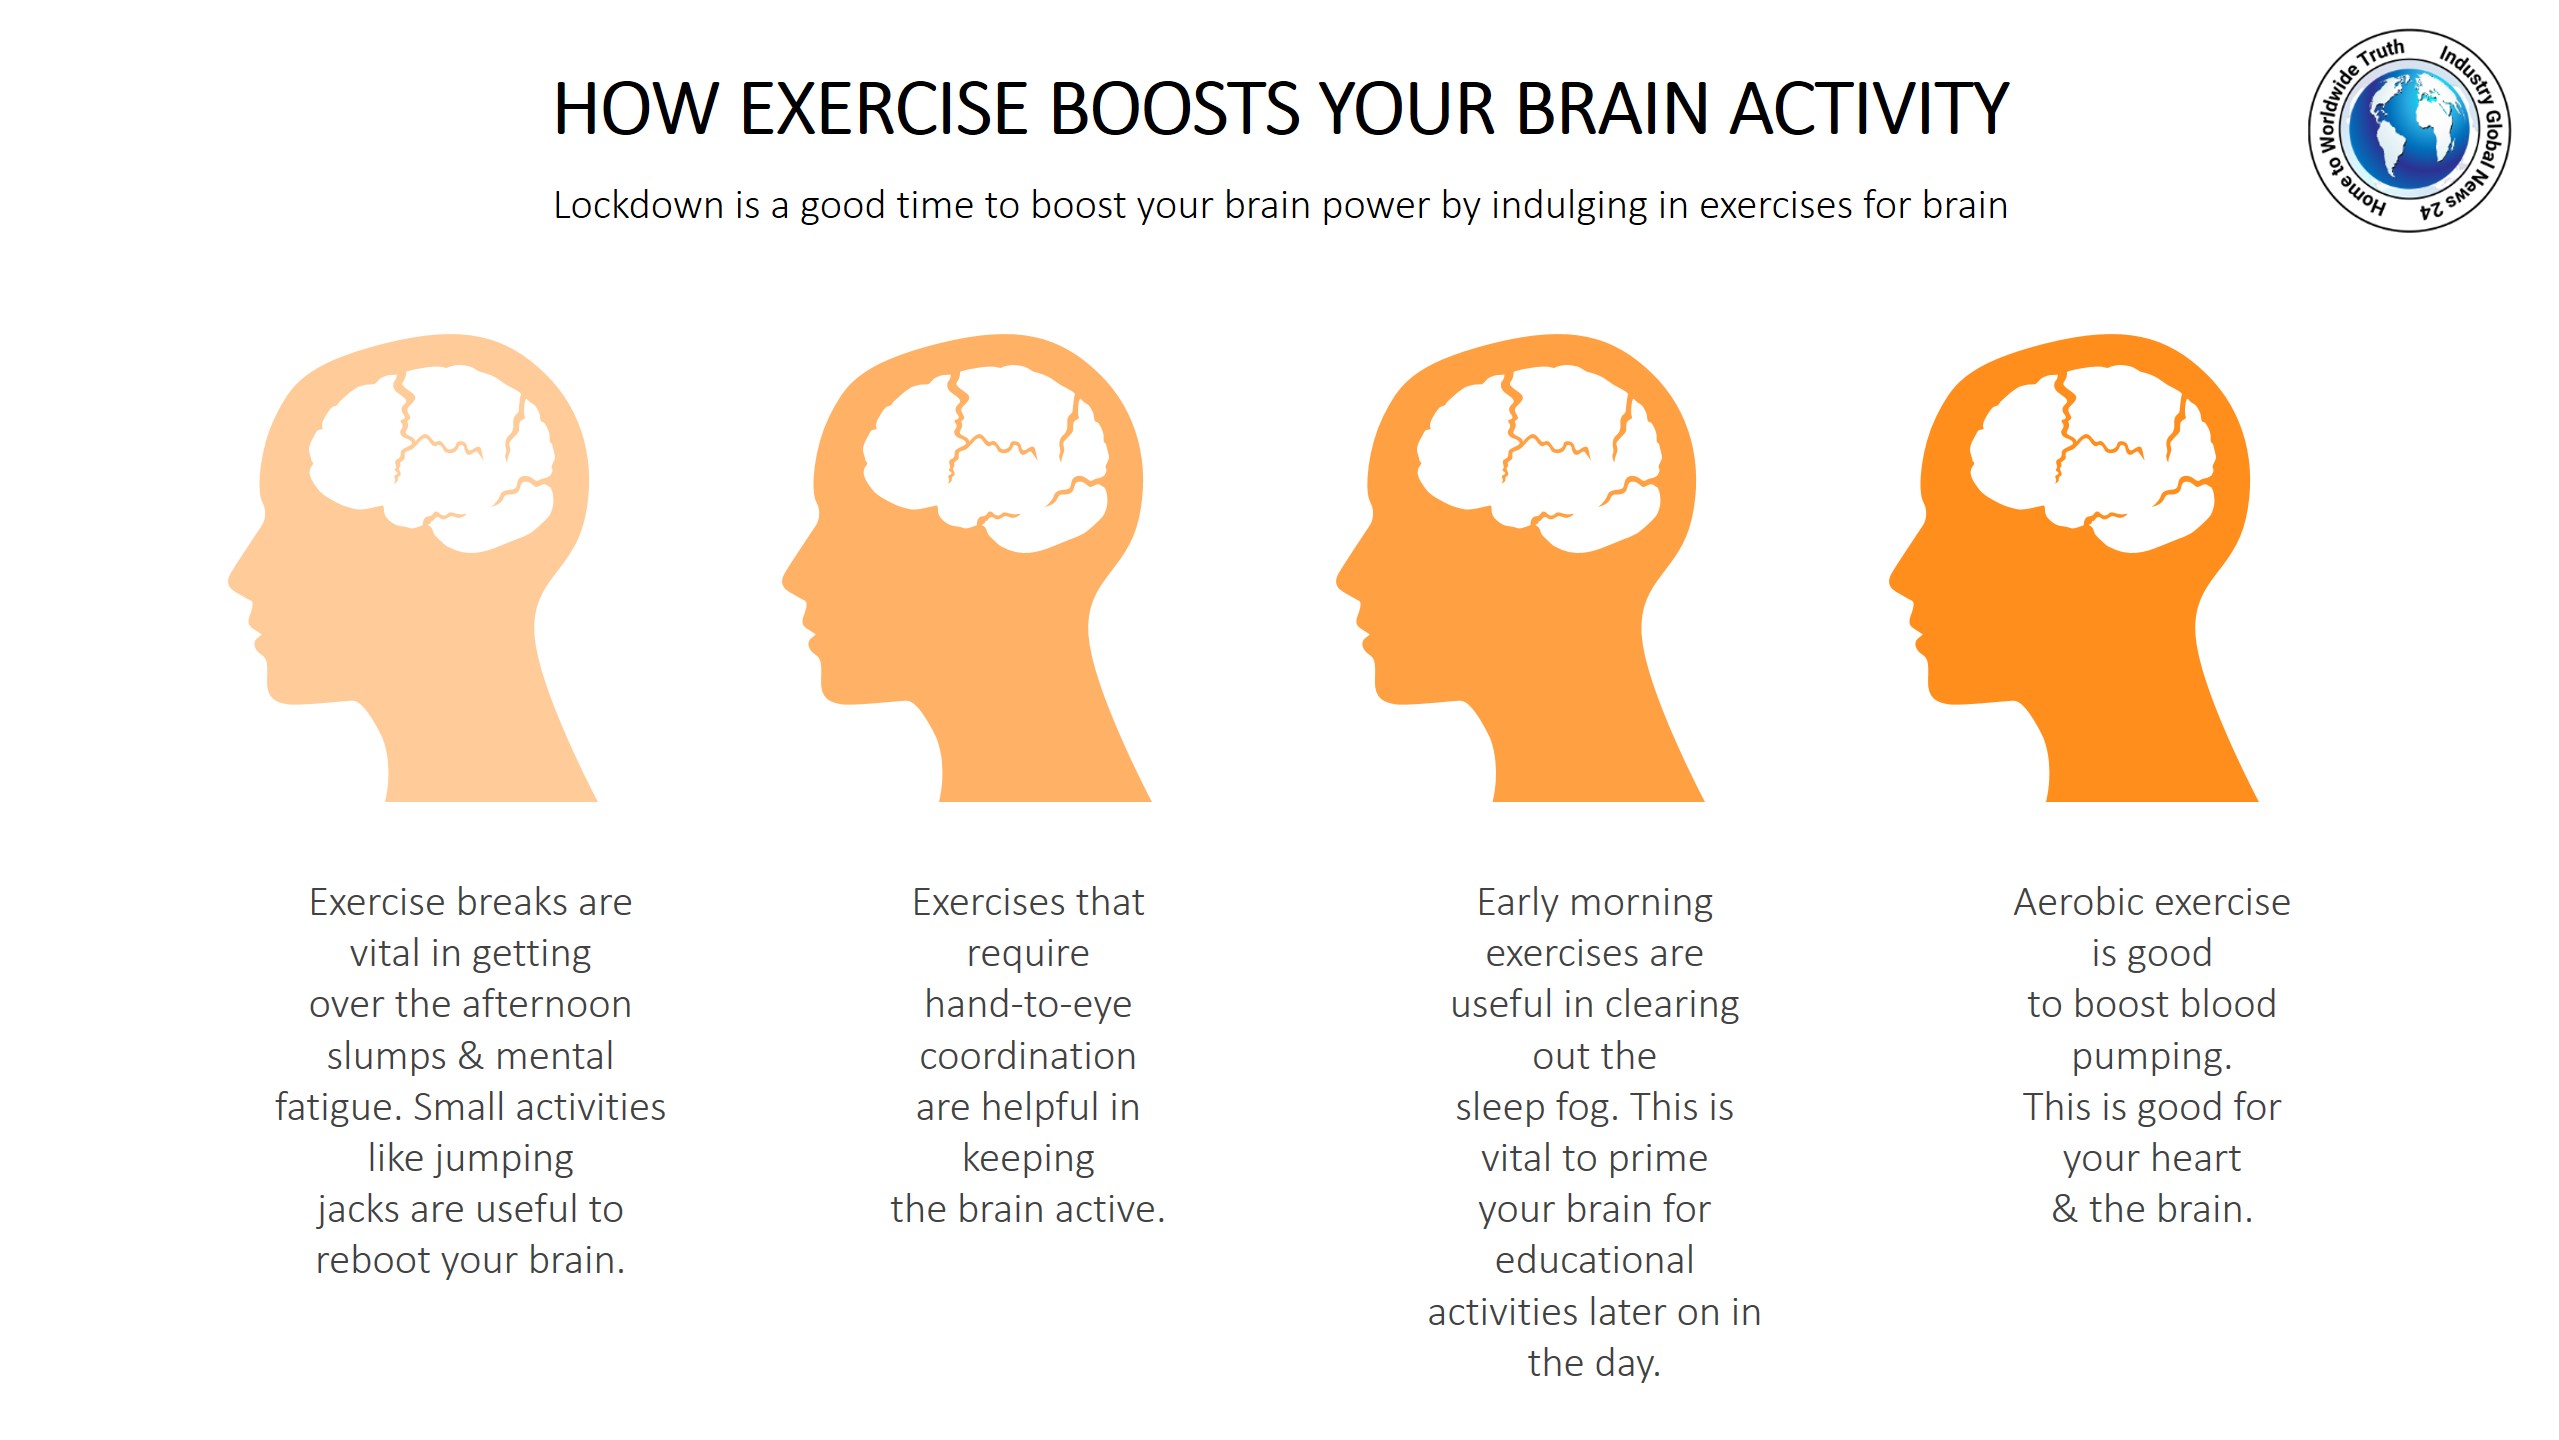 How exercise boosts your brain activity